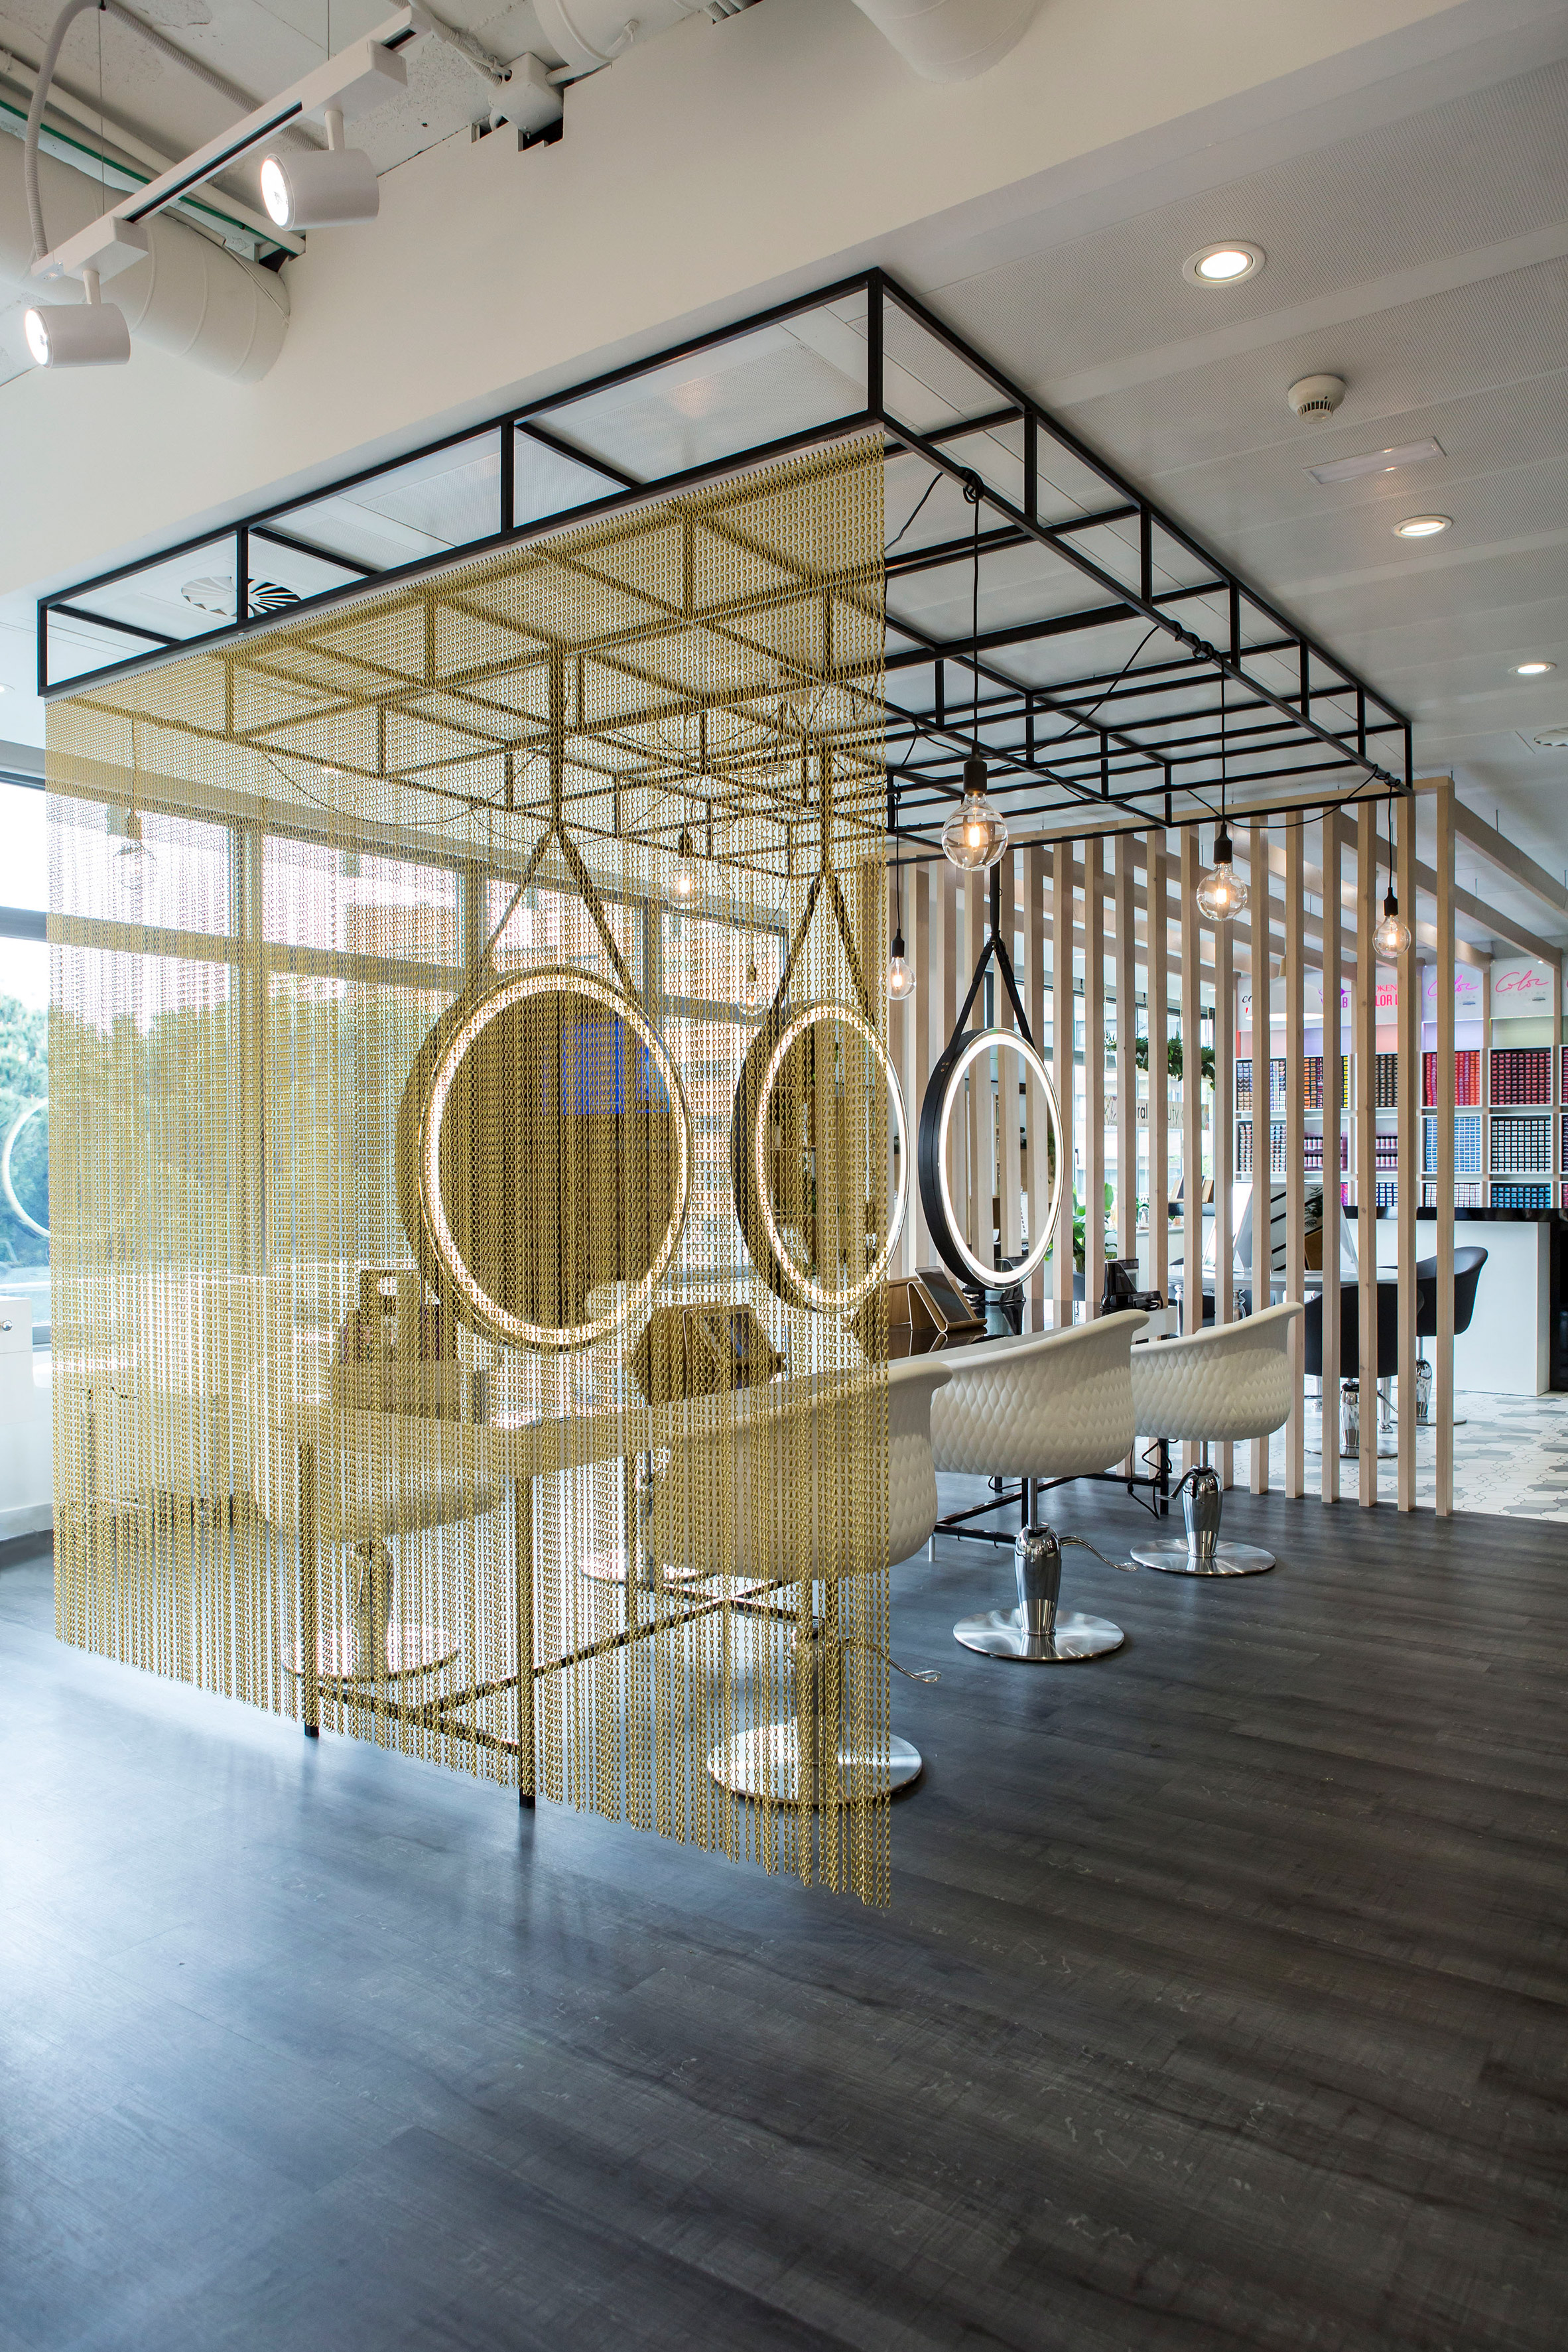 Kriskadecor's chain-link partitions aid social distancing in shared interiors